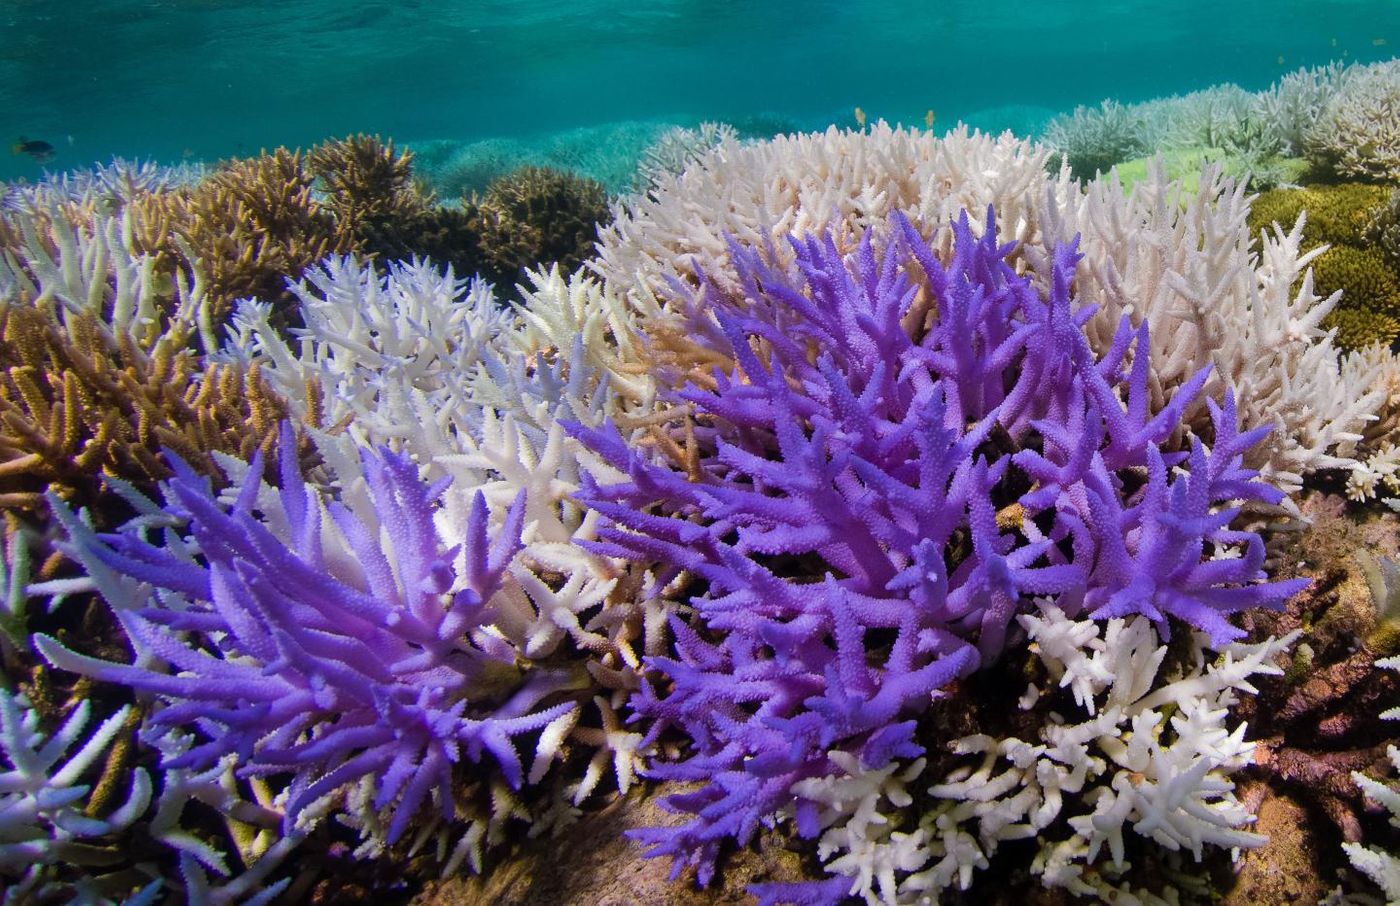 Acropora corals. Colourful bleaching in New Caledonia. / Credit: The Ocean Agency/XL Catlin Seaview Survey